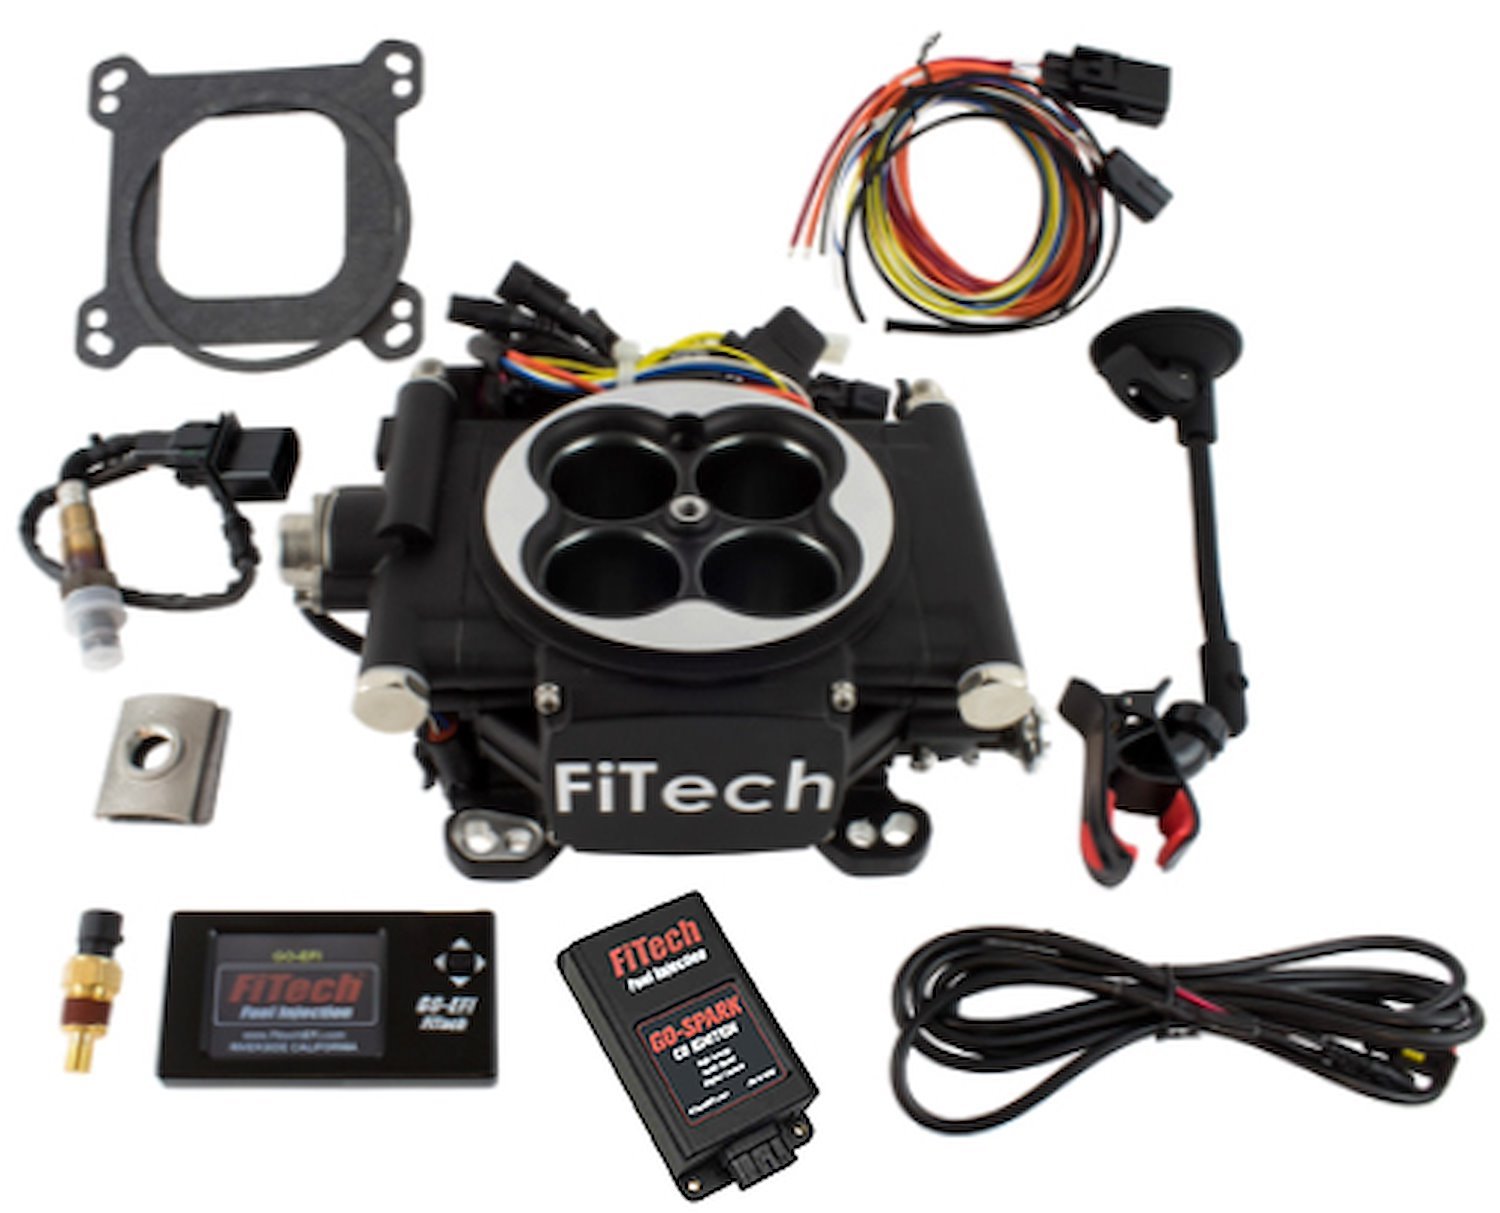 Go EFI-4 600 HP Throttle Body Fuel Injection Master Kit With CDI Box - Matte Black